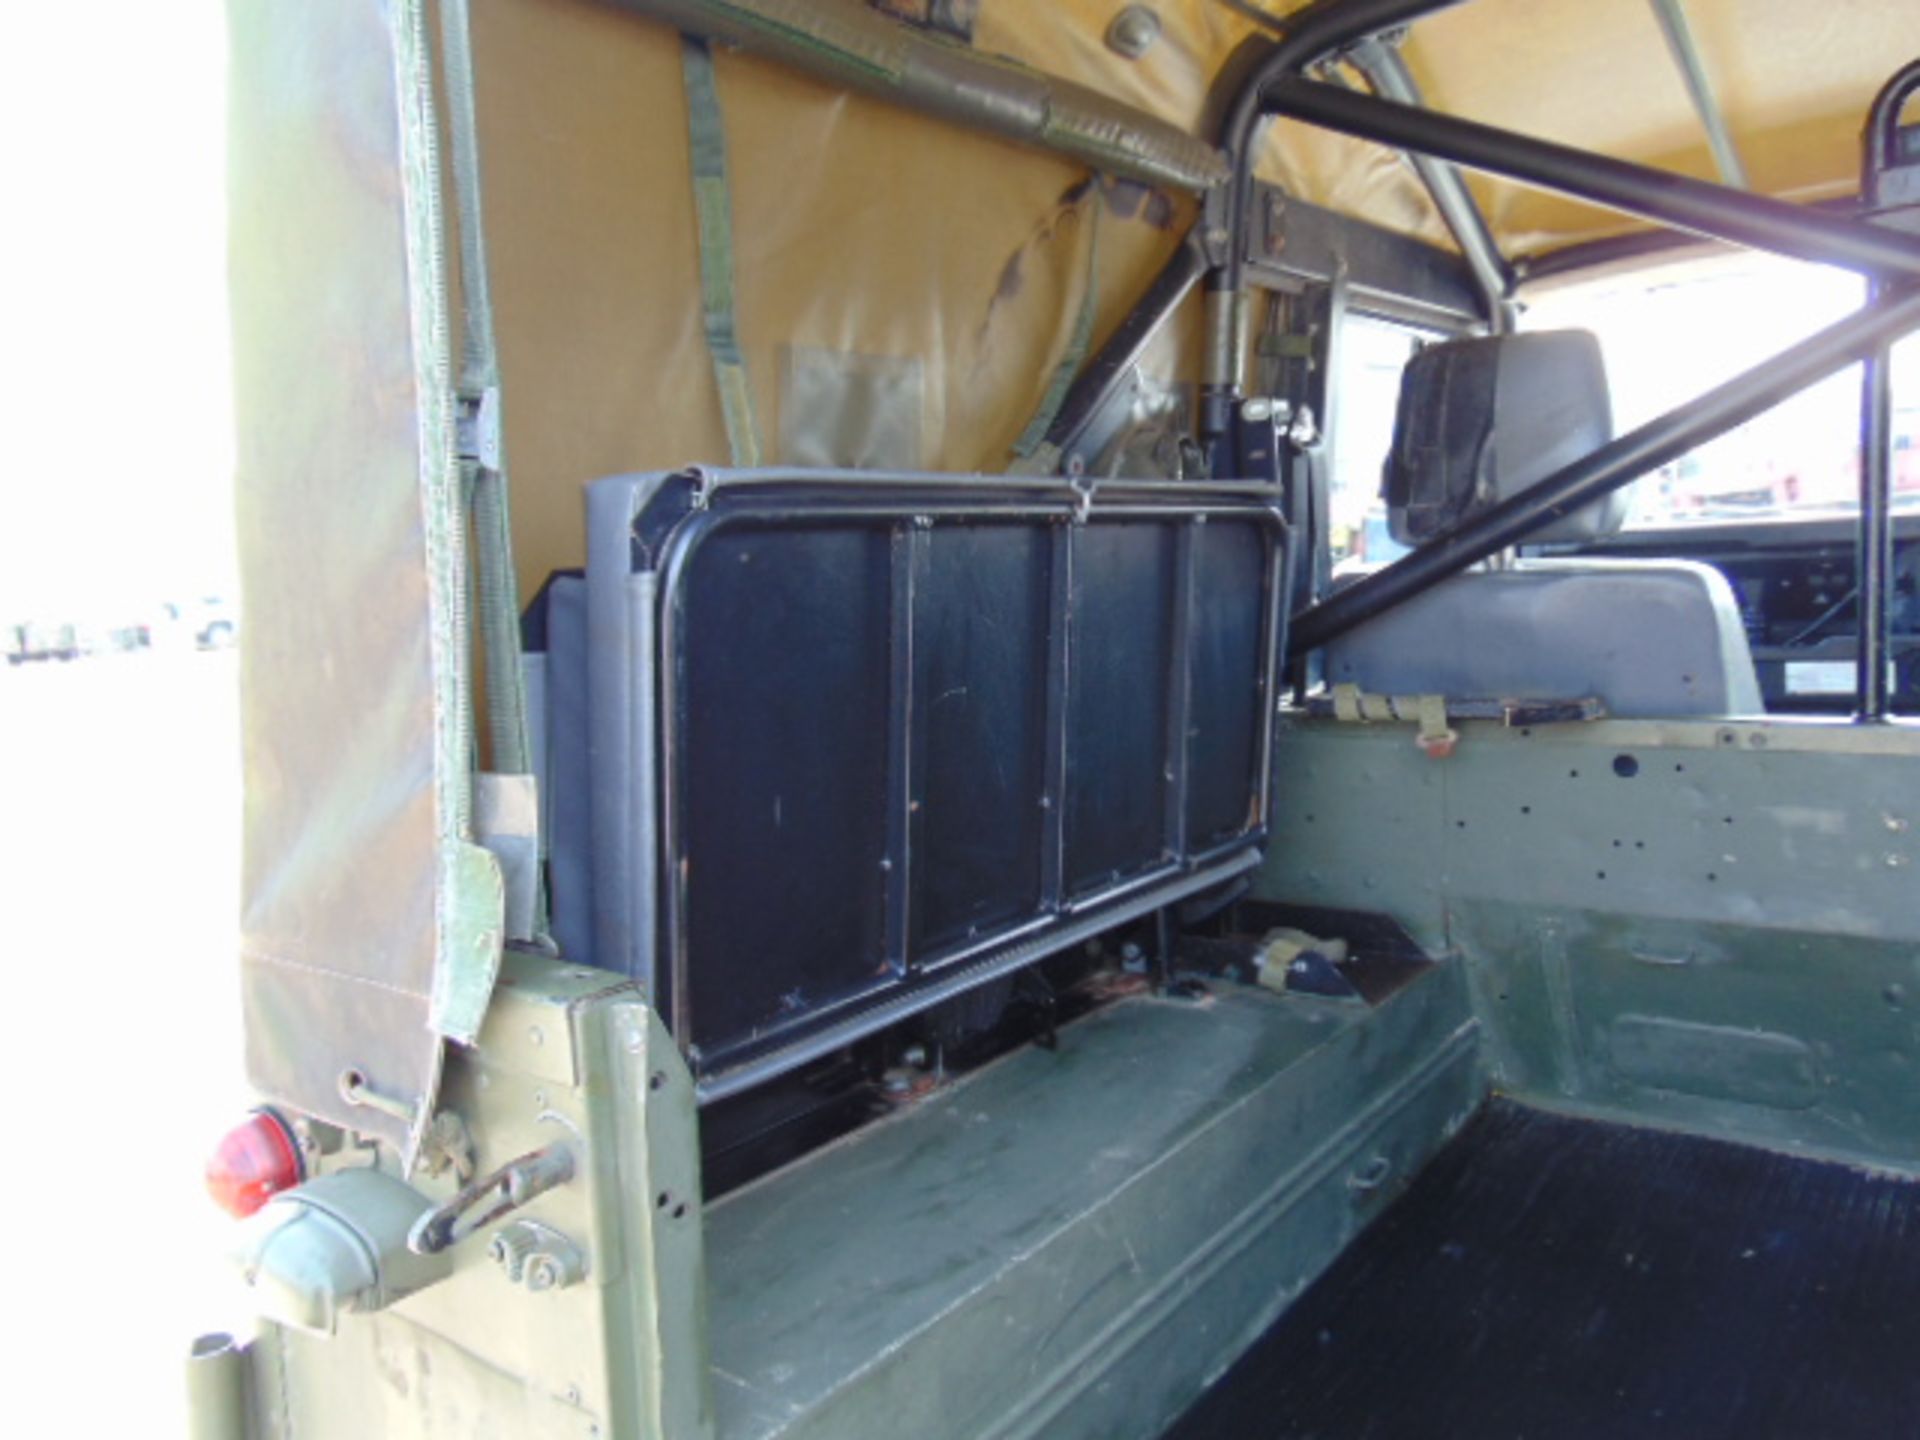 Military Specification Land Rover Wolf 90 Soft Top - Image 14 of 26